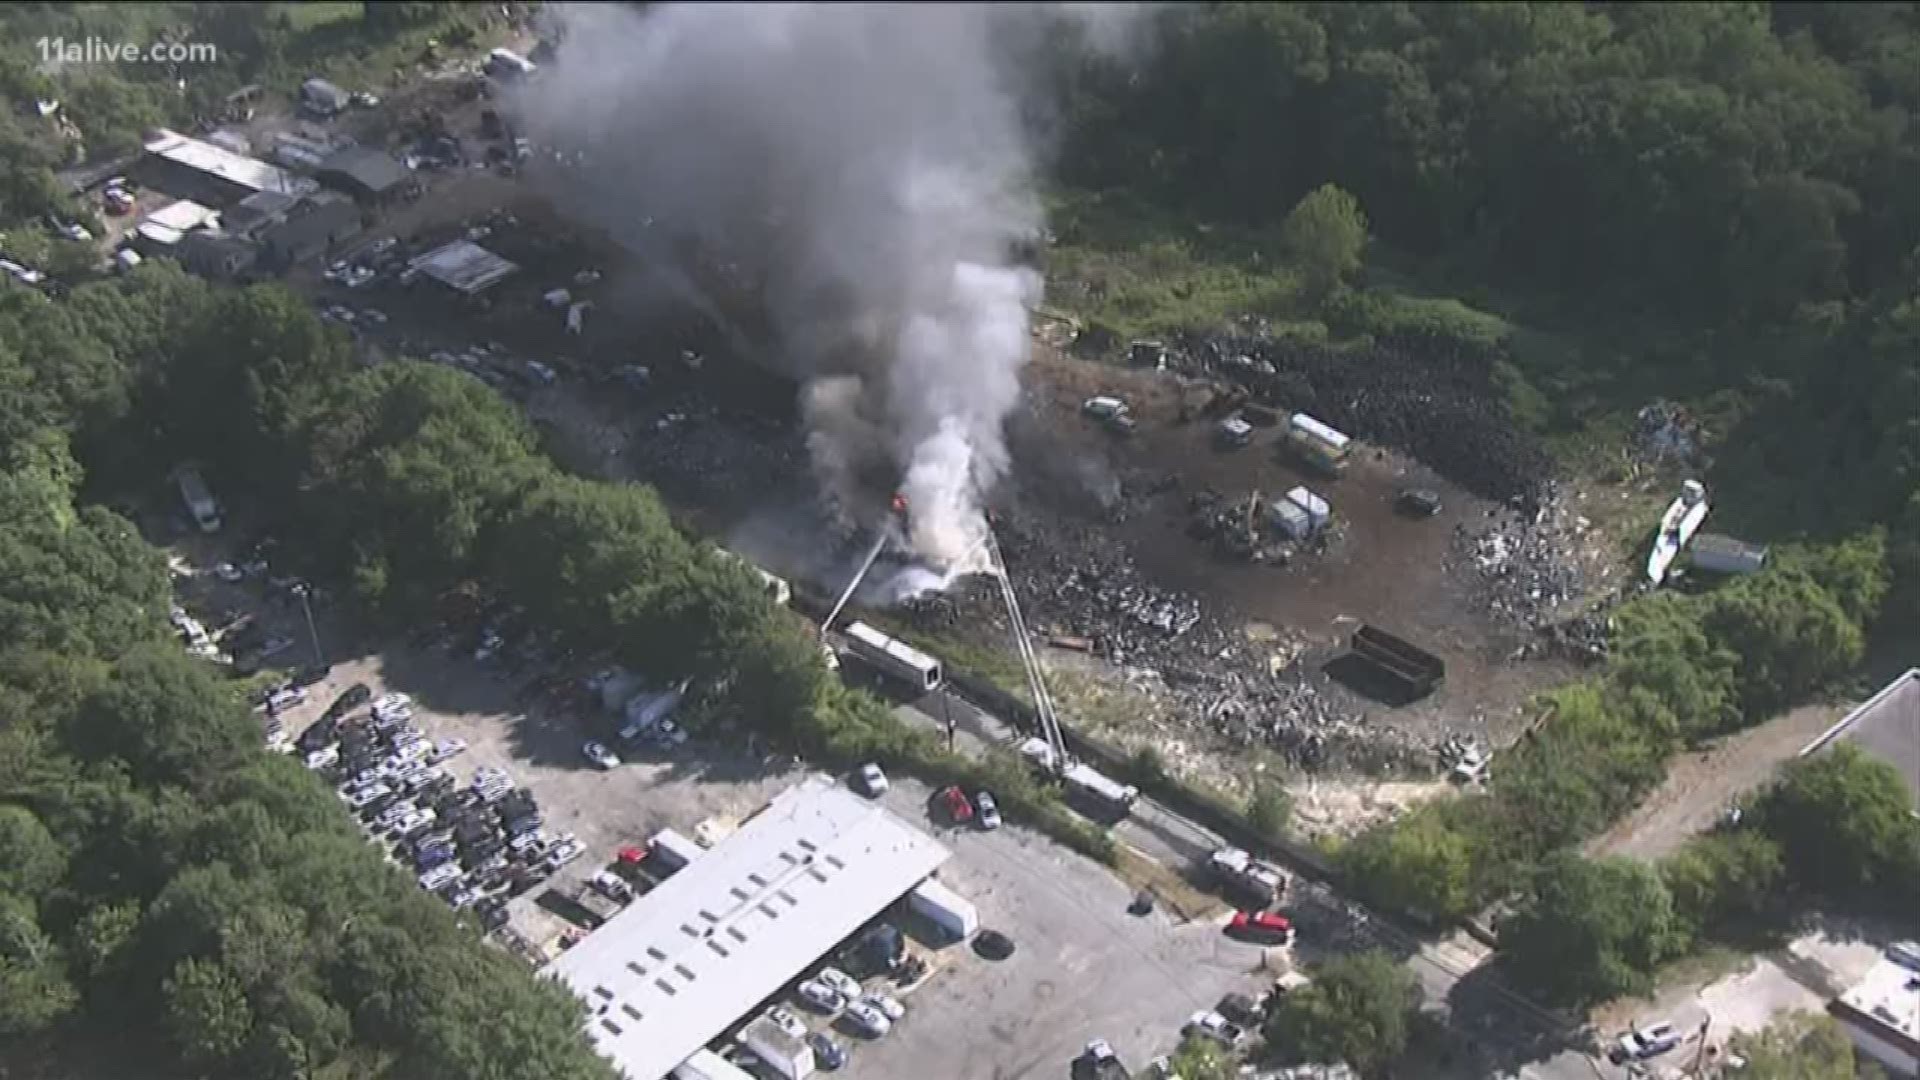 Atlanta fire officials confirmed the fire was happening at Regina Dr. NW in west Atlanta, off Donald Lee Hollowell Parkway. A recycling yard is located on the street